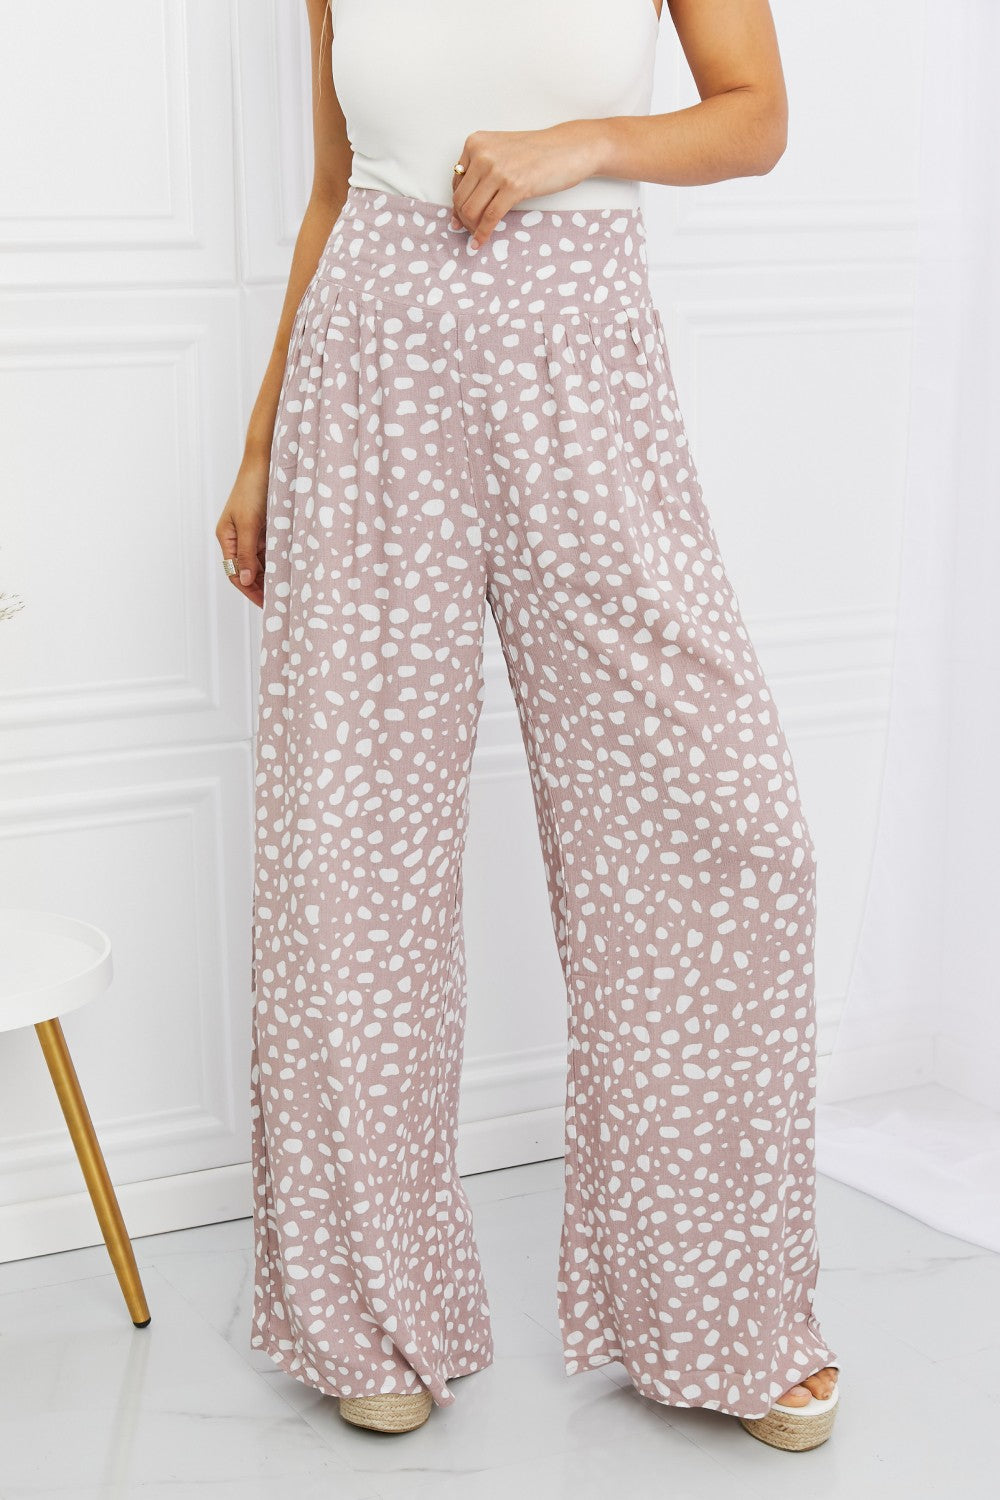 Kori  Animal Print Tied Pleated Wide Leg Pants - Coco and lulu boutique 